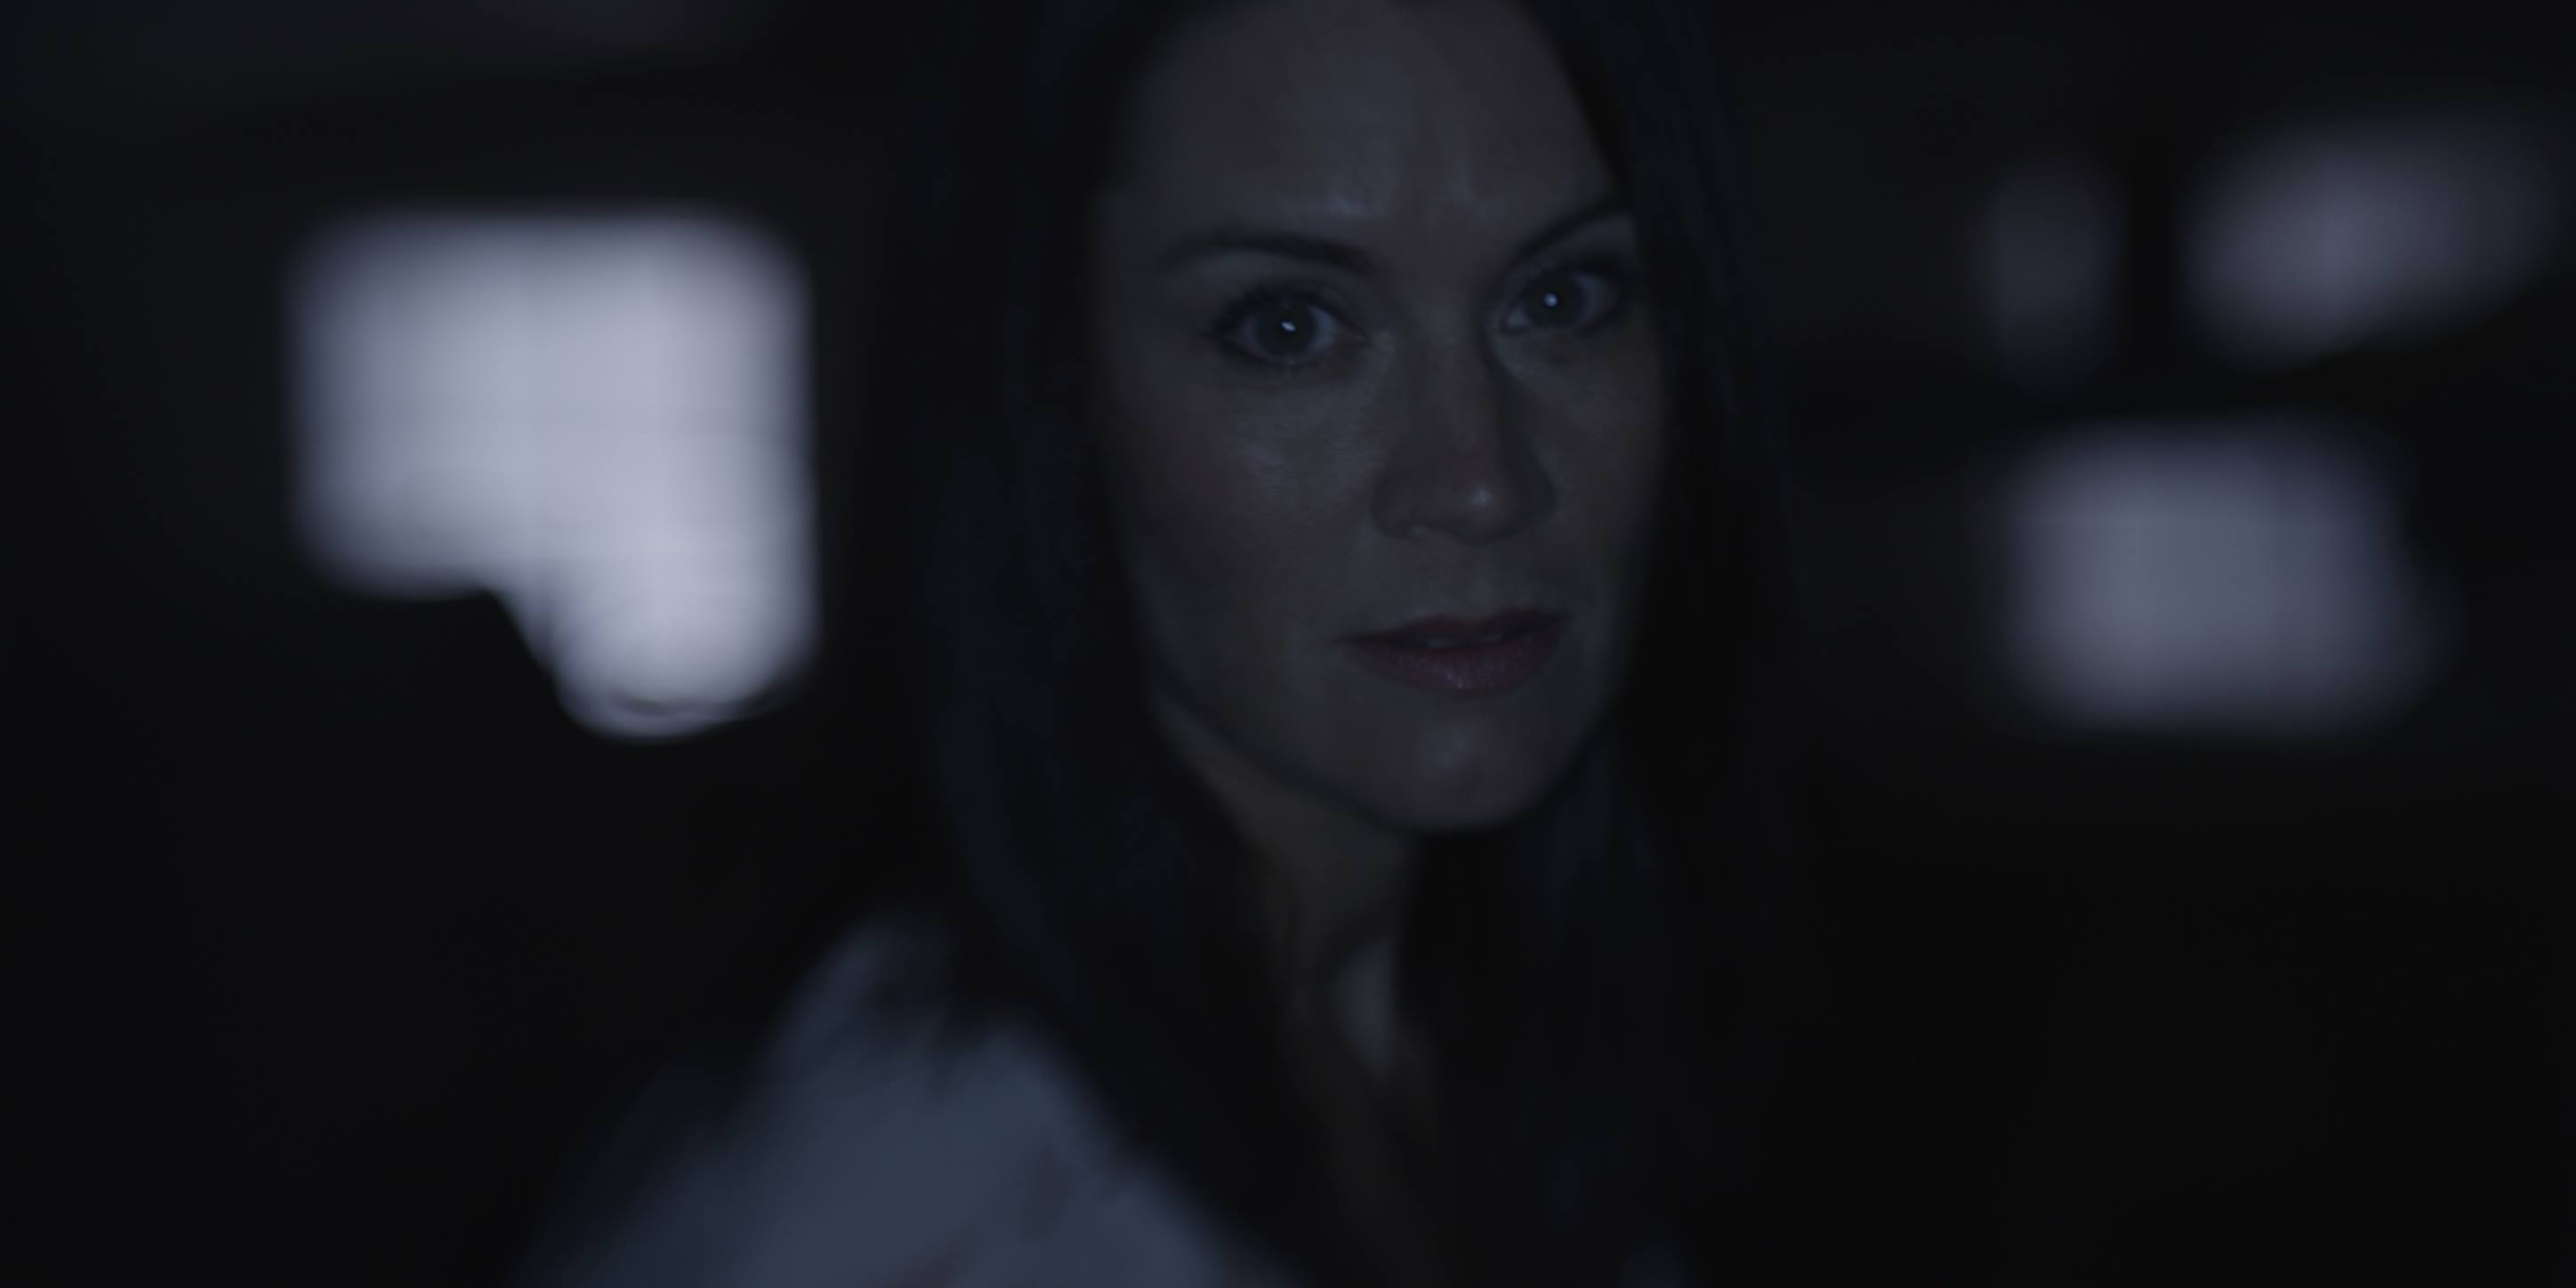 As Laura Wade in The Darker Path